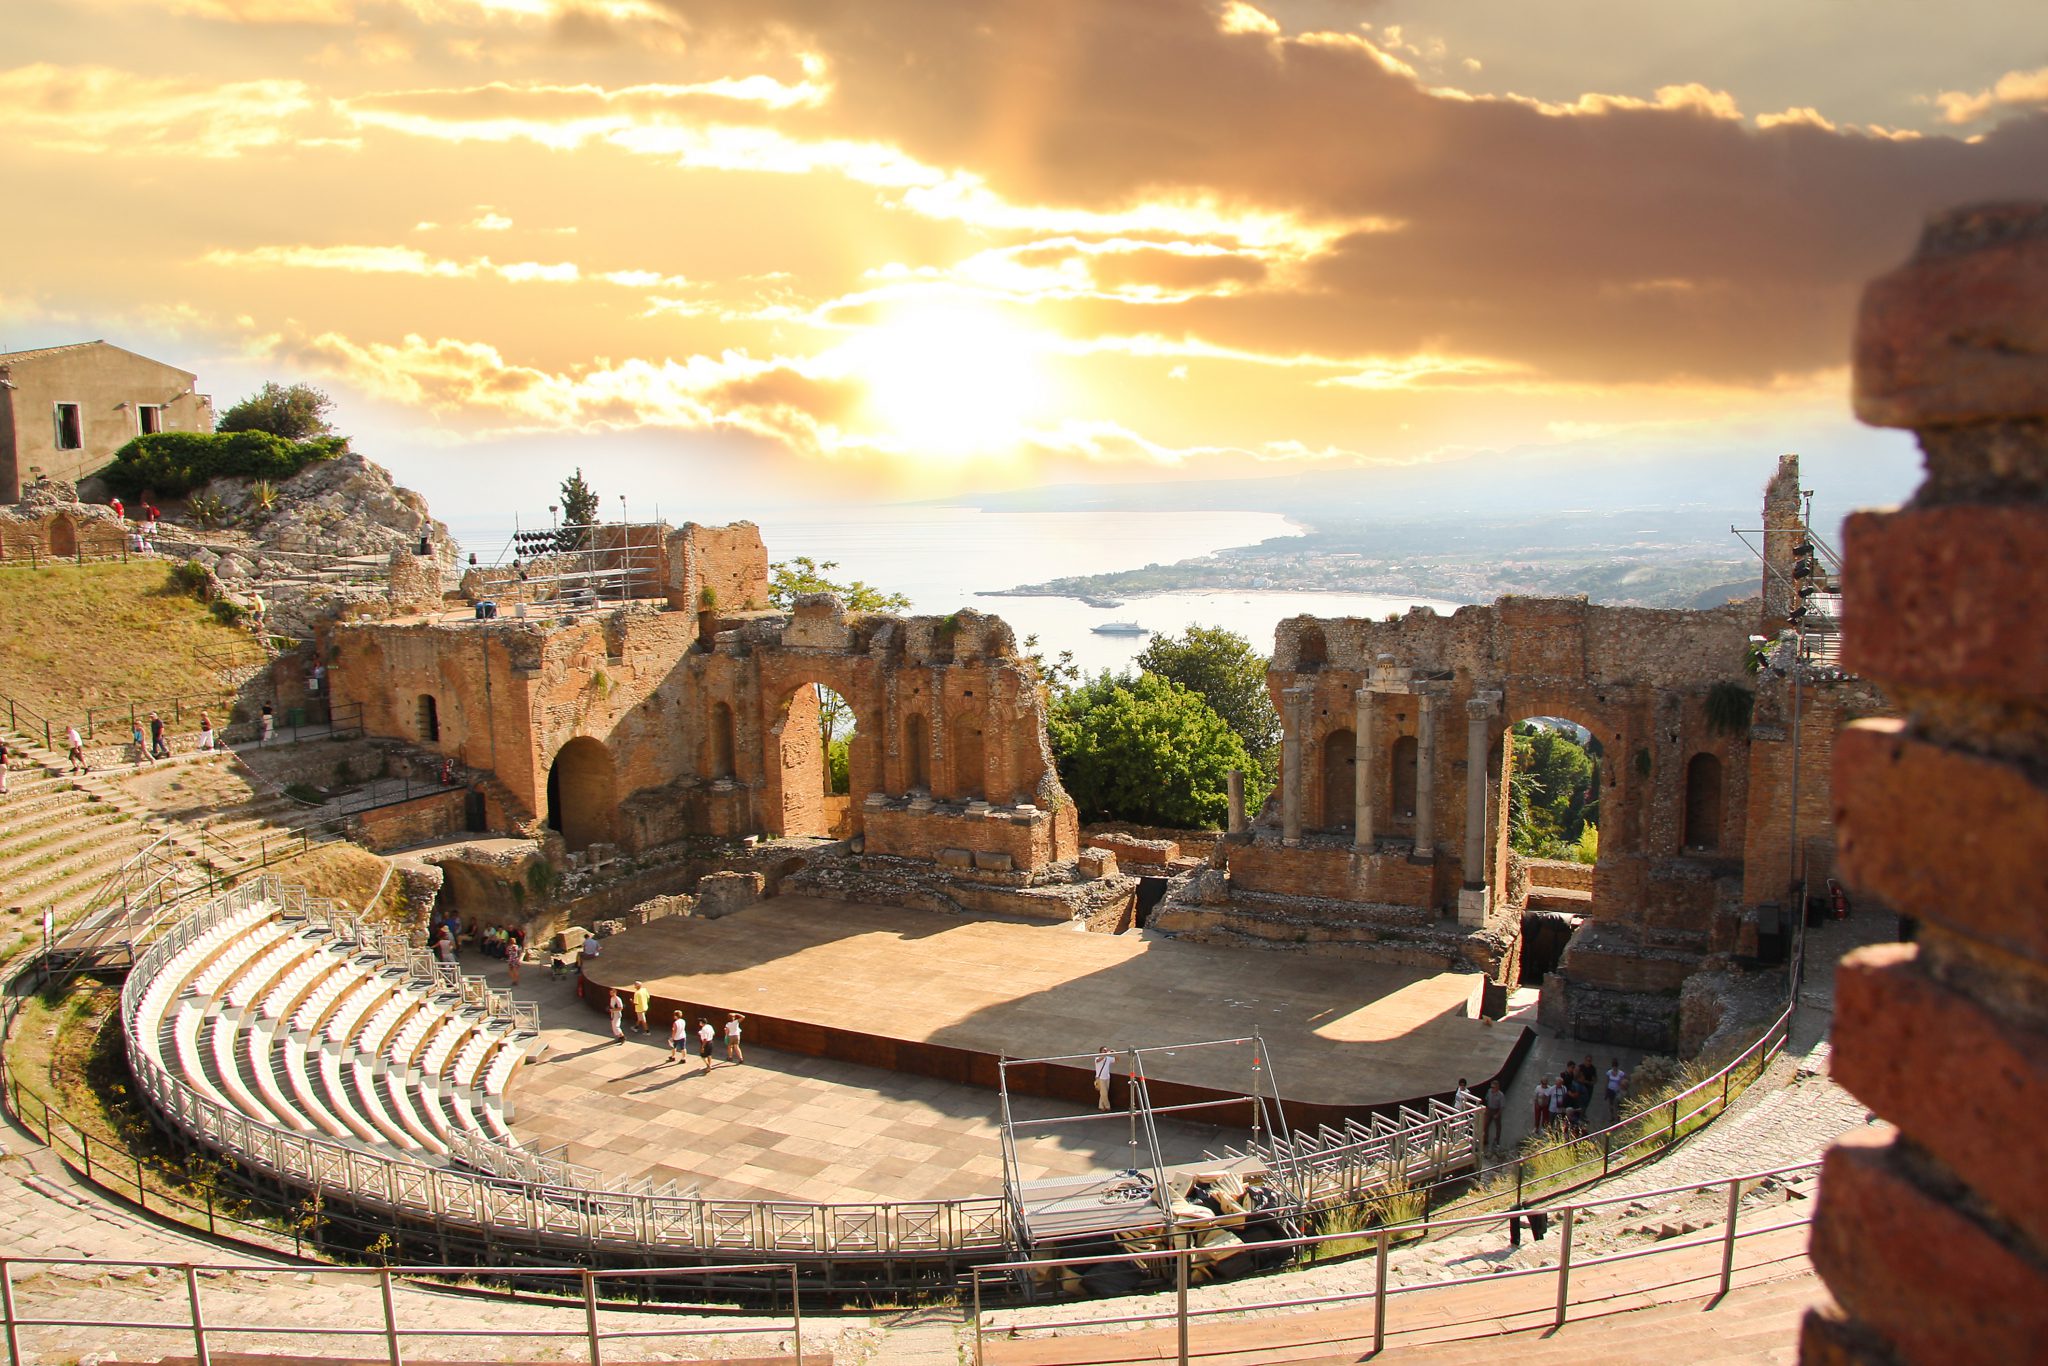 http://www.dreamstime.com/royalty-free-stock-photos-taormina-theater-sicily-italy-image18976348